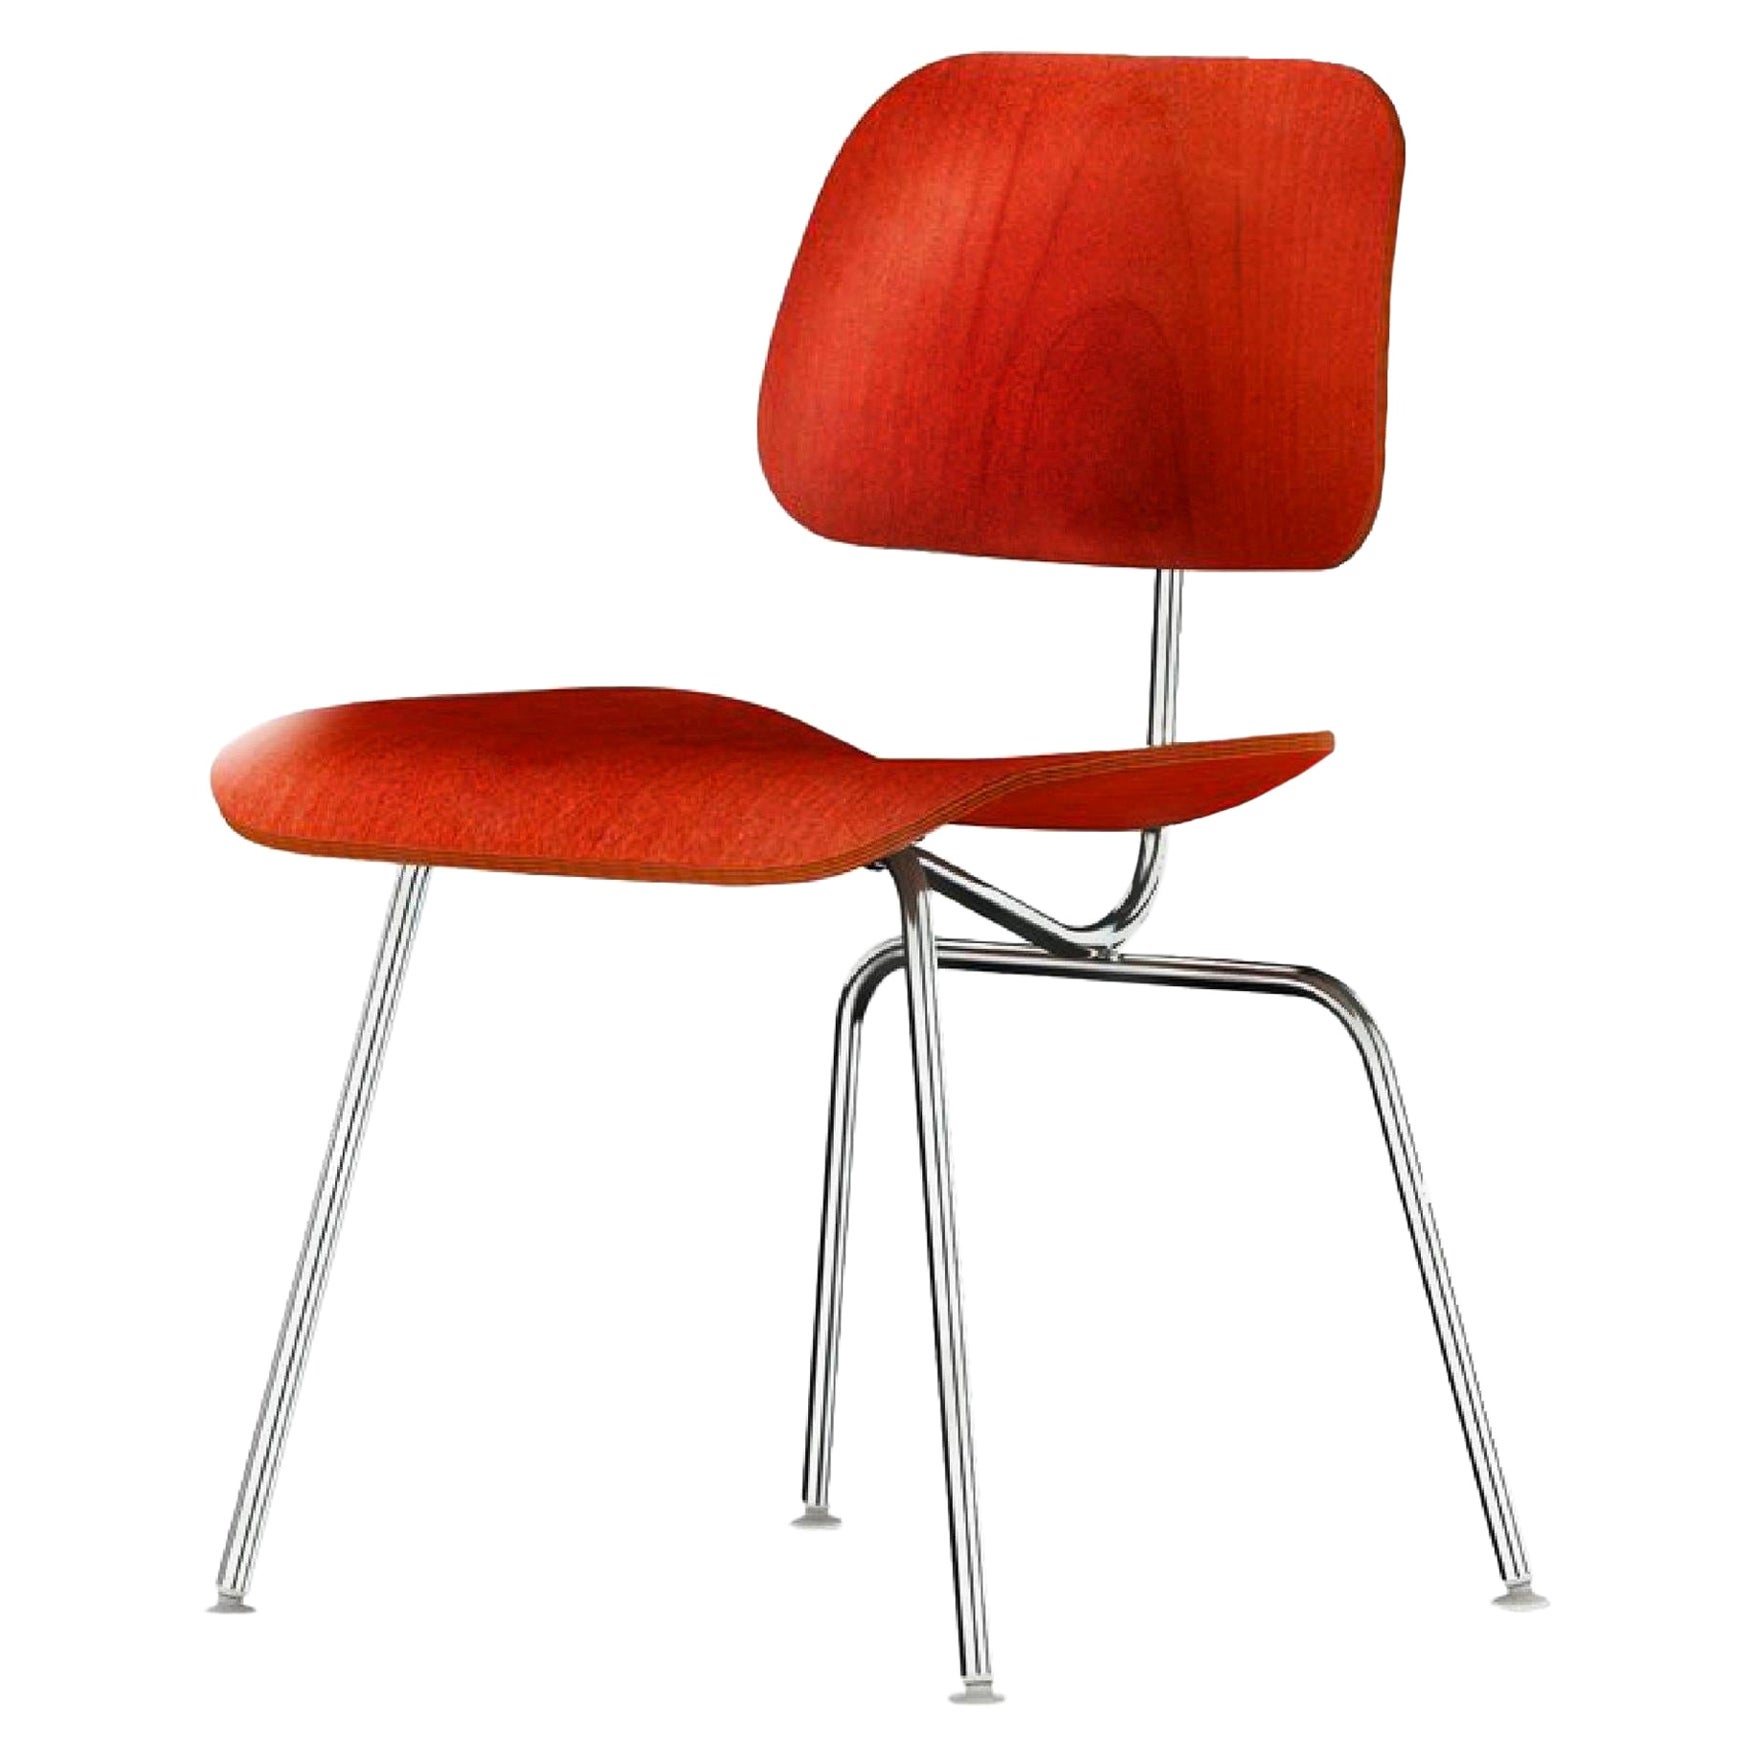 Chaise DCM Charles and Ray Eames, Herman Miller, Dining, Chaise d'appoint en hêtre rouge